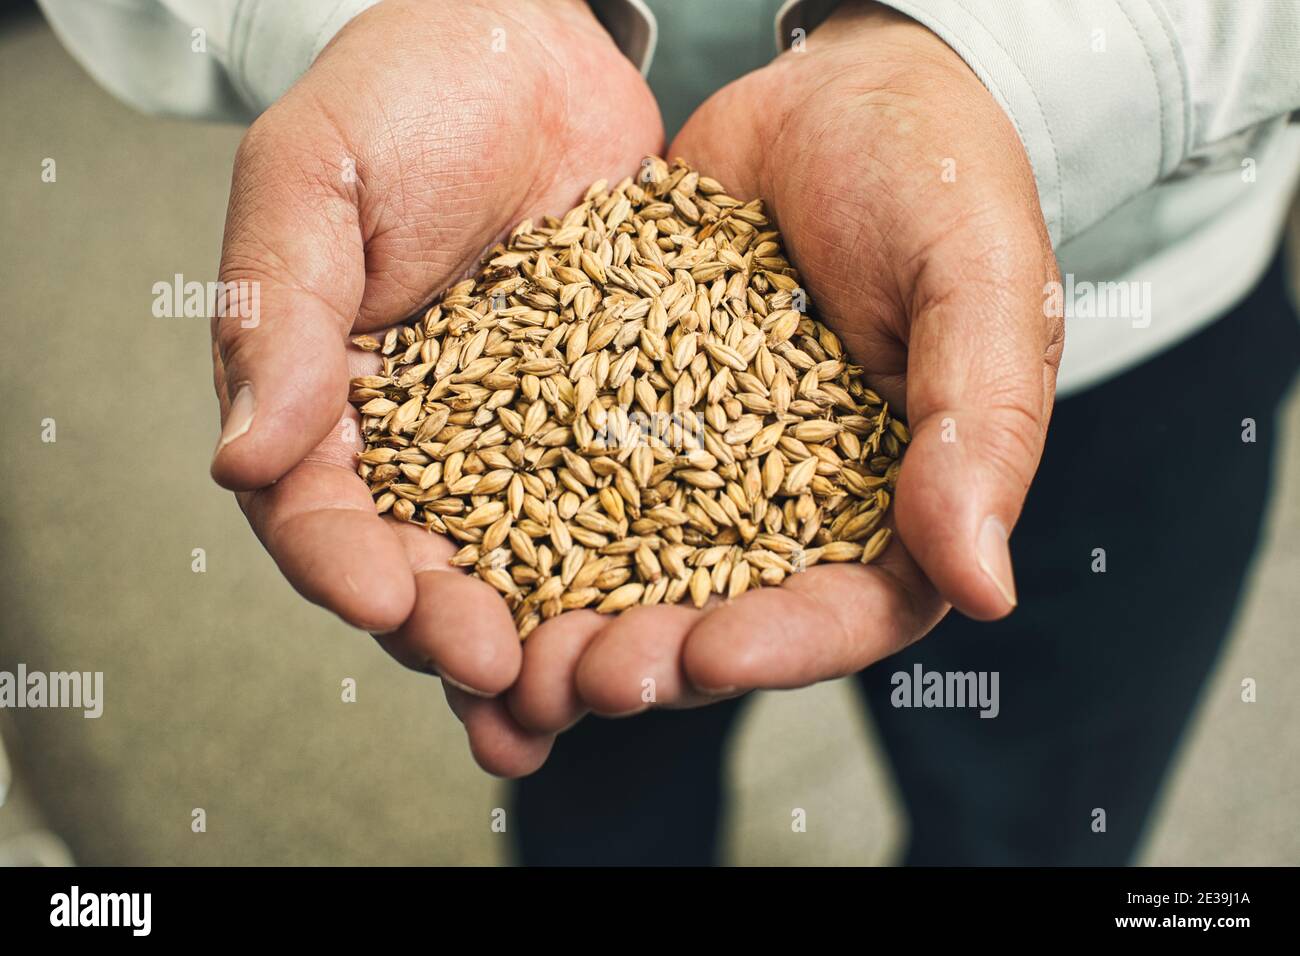 cupped hands holding malted barley ready for whisky distilling in Scotland Stock Photo